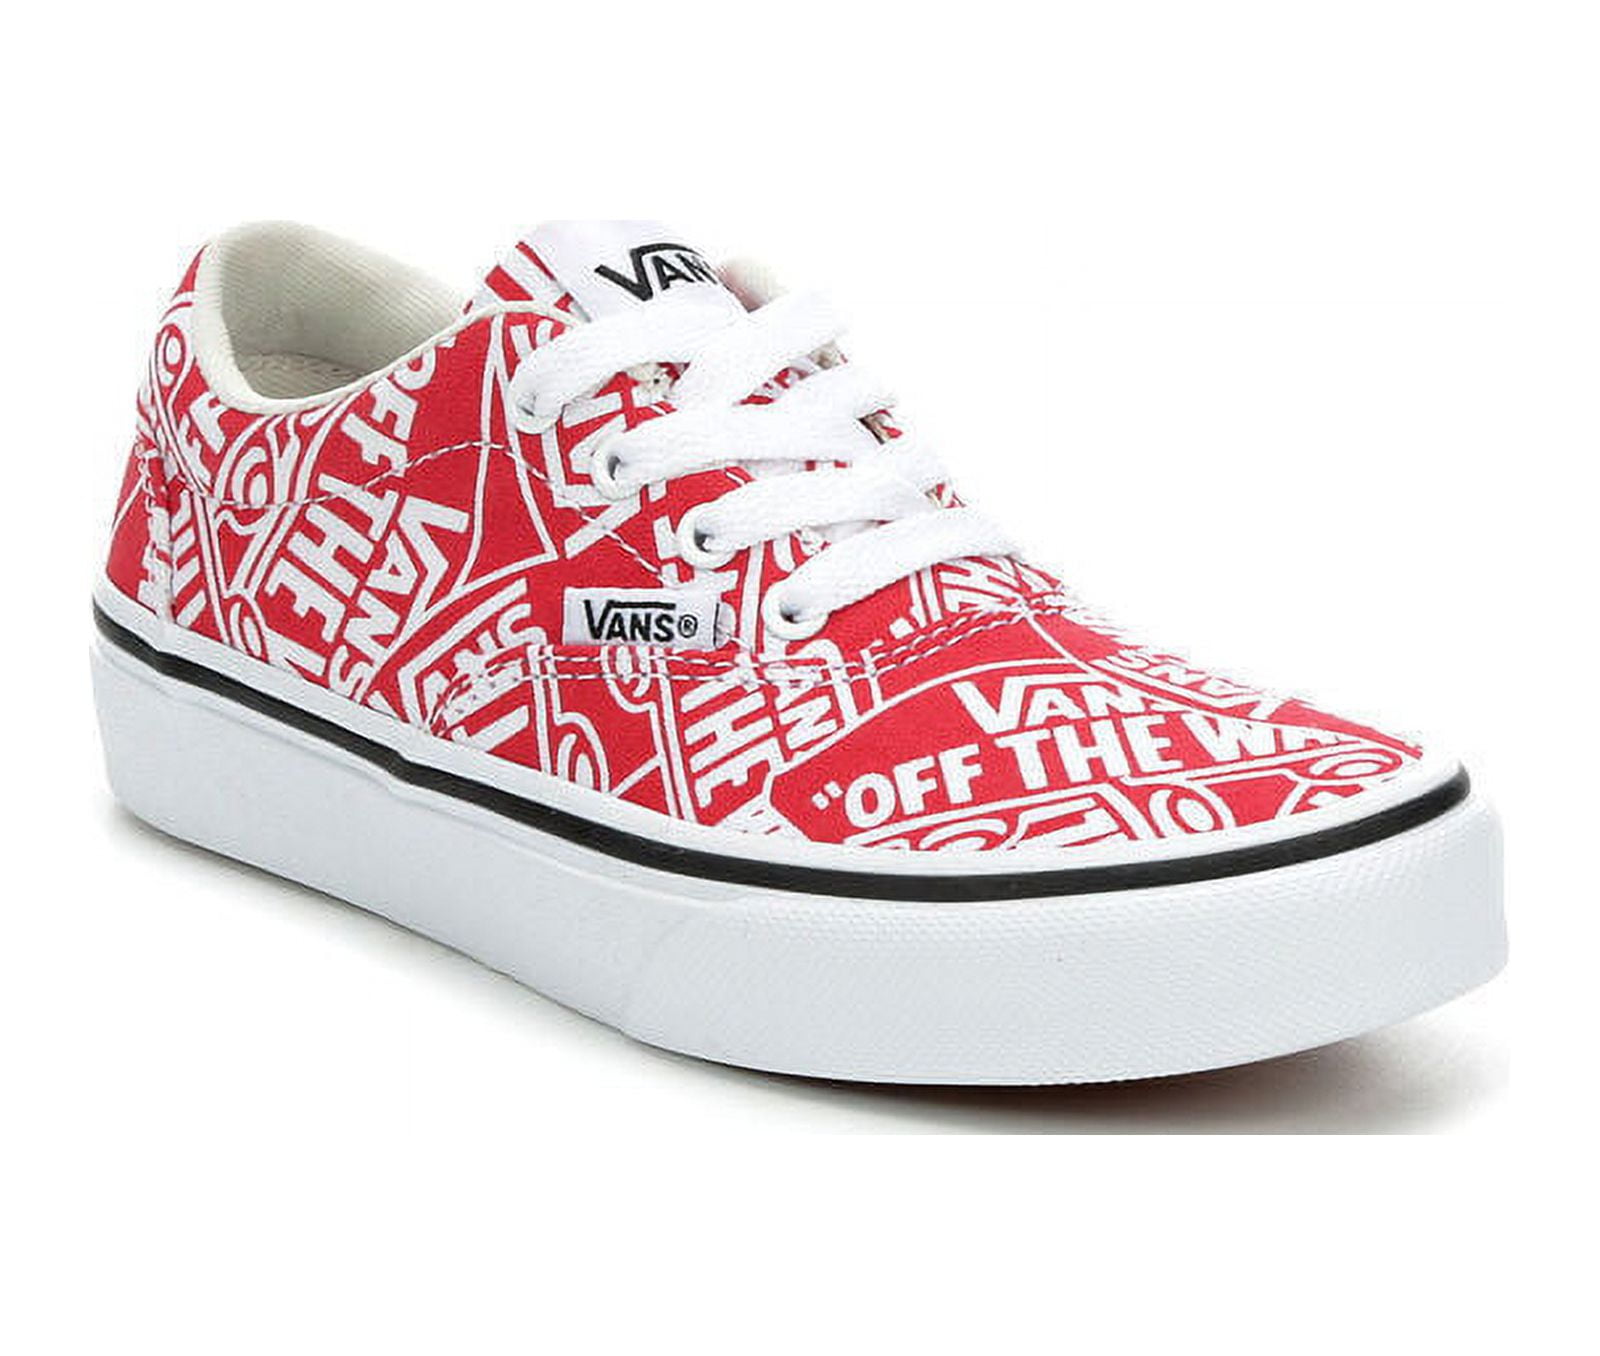 Vans Doheny OTW Repeat VN0A3MWAUZA1 Kid's Red/White Skateboarding Shoes ...